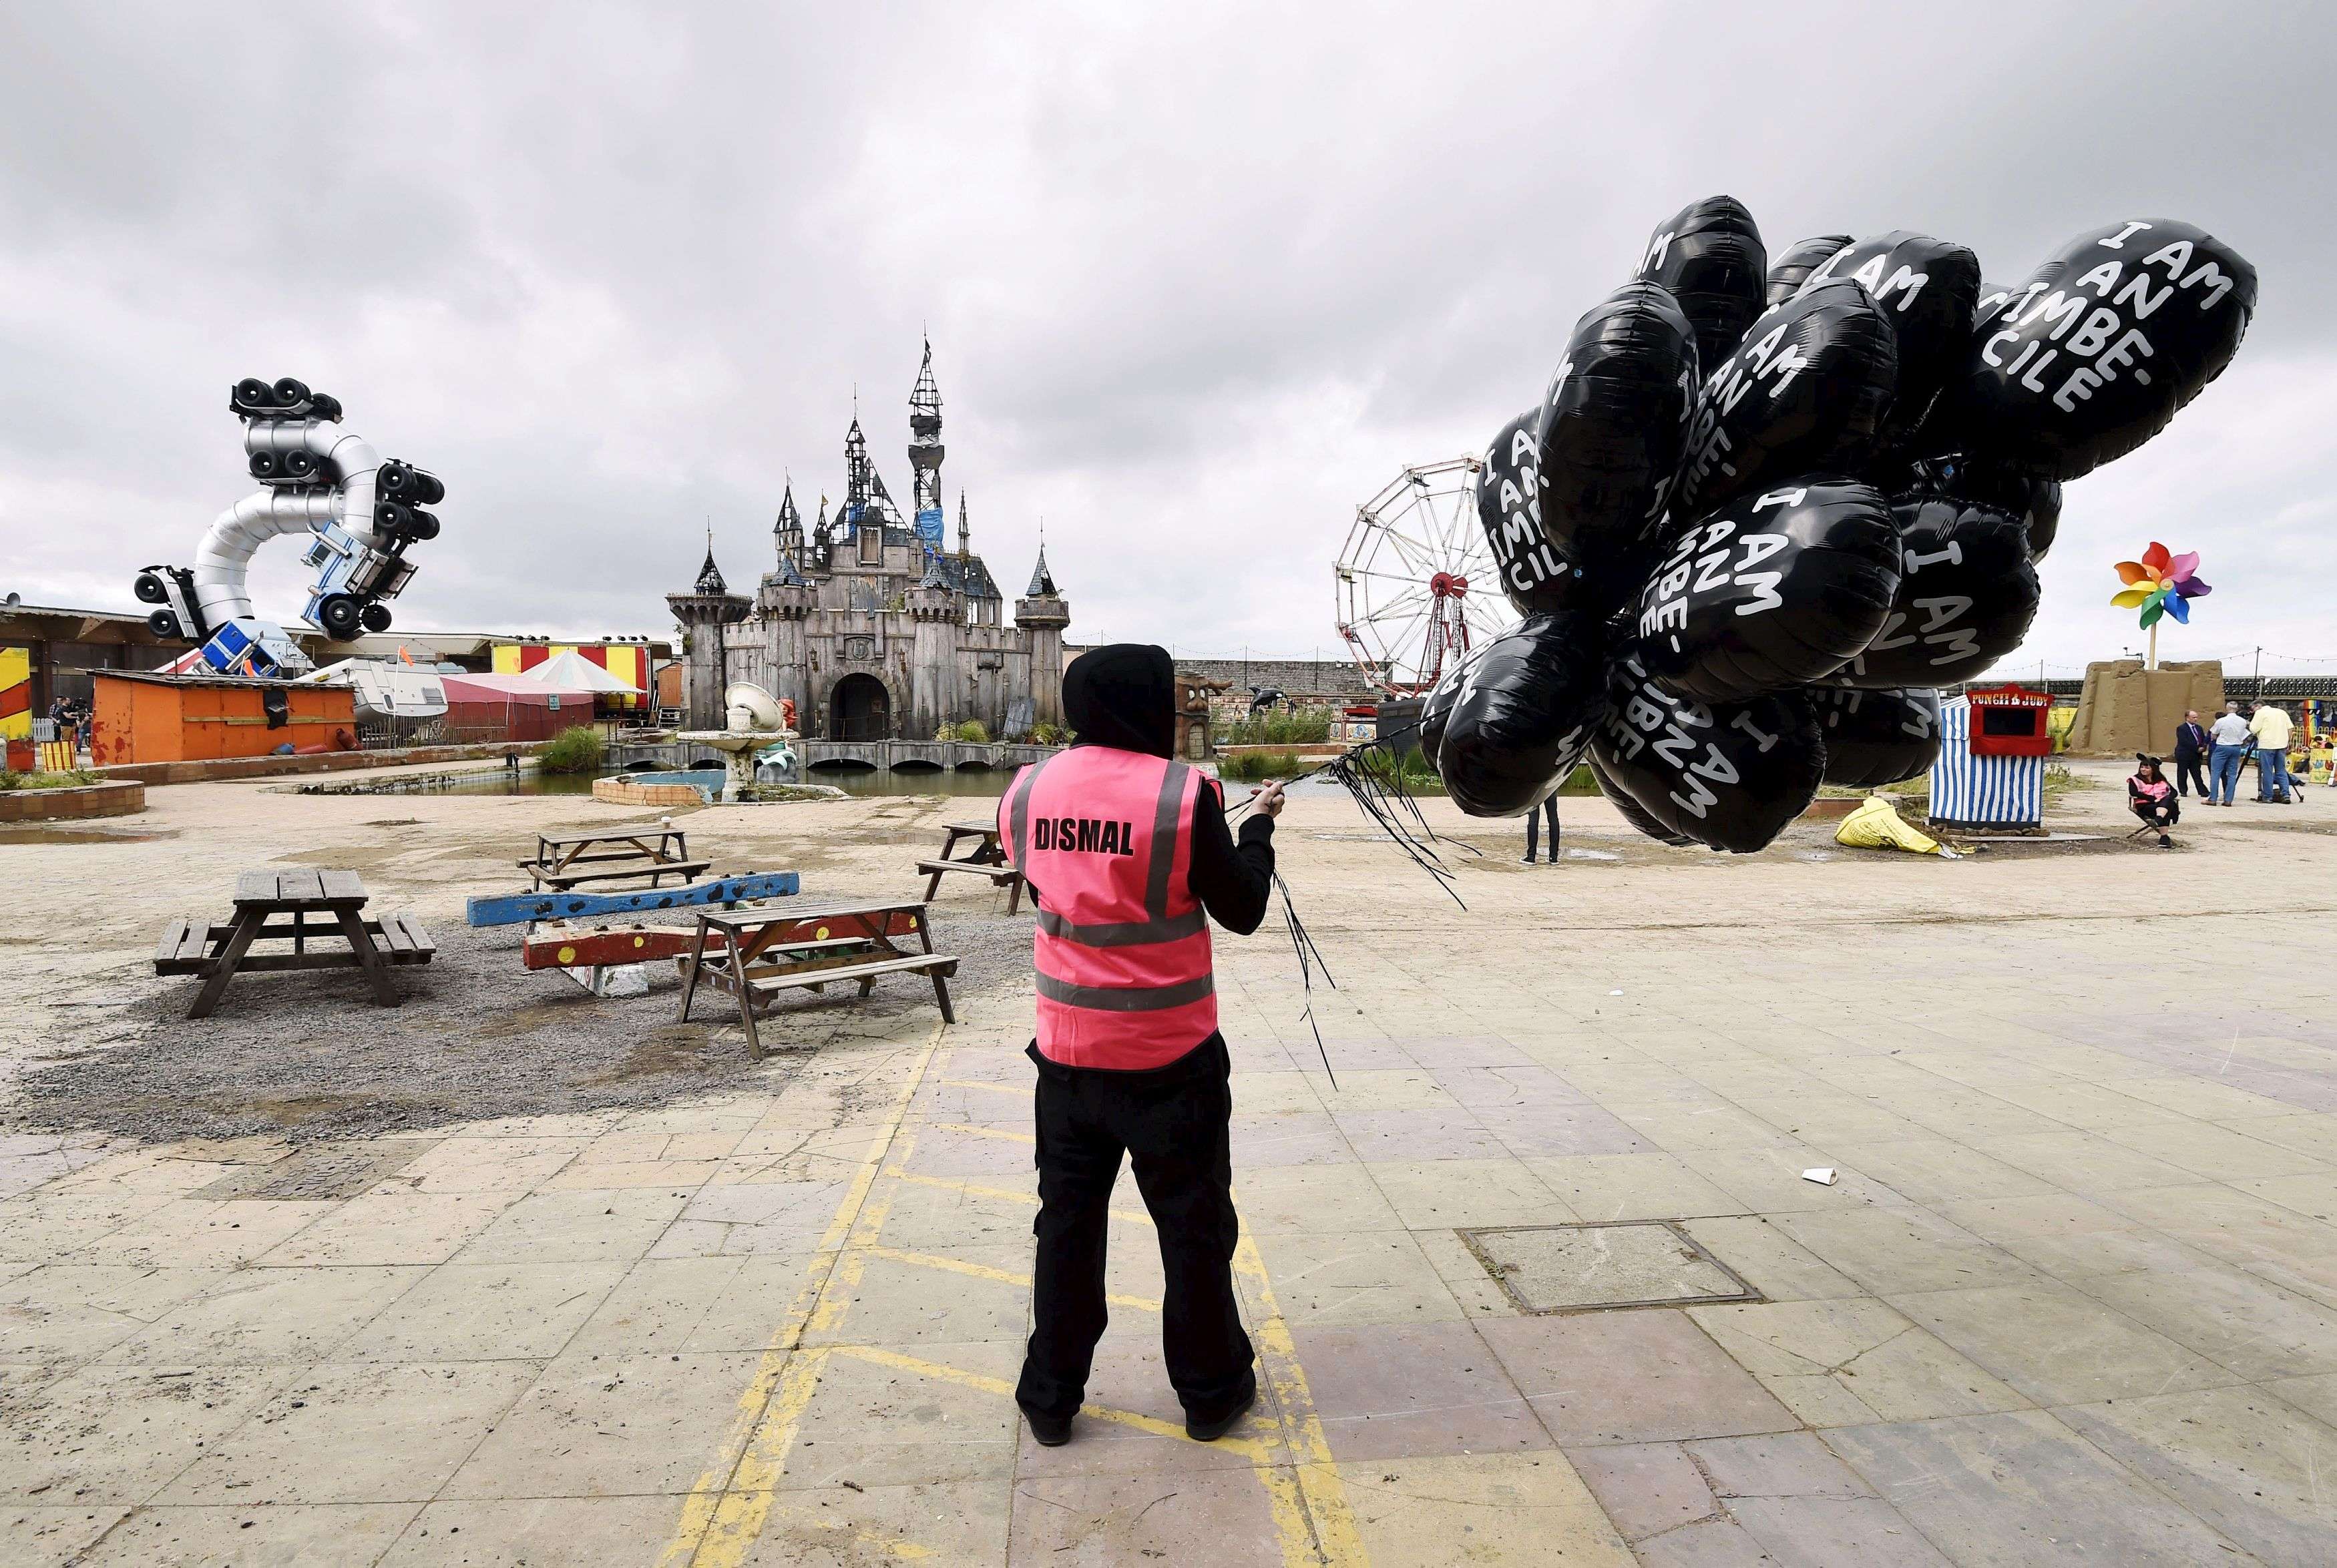 A performer holds a bunch of balloons at 'Dismaland', a theme park-styled art installation by British artist Banksy, at Weston-Super-Mare in southwest England, Britain, August 20, 2015. REUTERS/Toby Melville